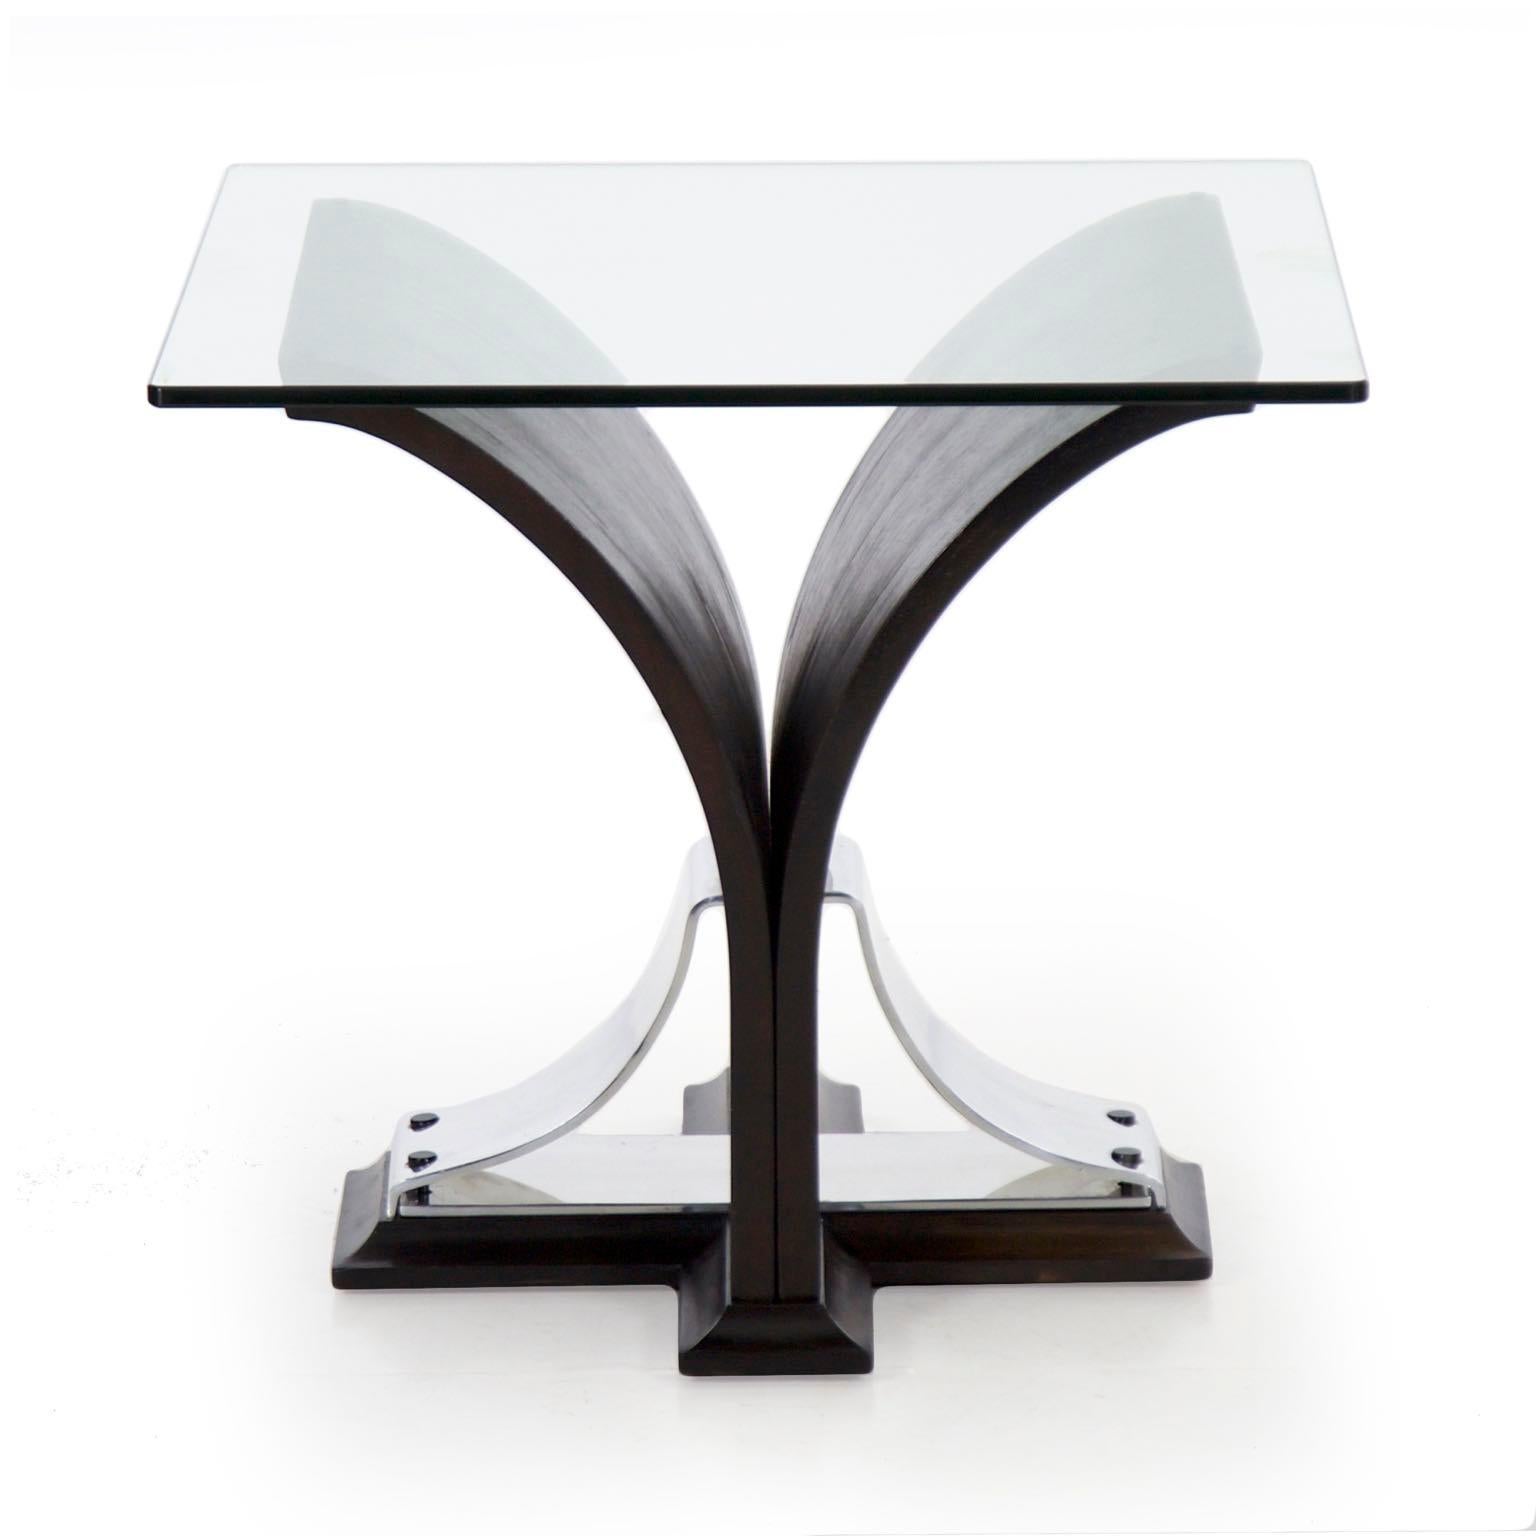 An interesting table from the second quarter of the 20th century with an ebonized walnut veneer steam bent into a sprouted form over a solid cove molded base supported by curved aluminum and locked together with chromed steel screws under a thick